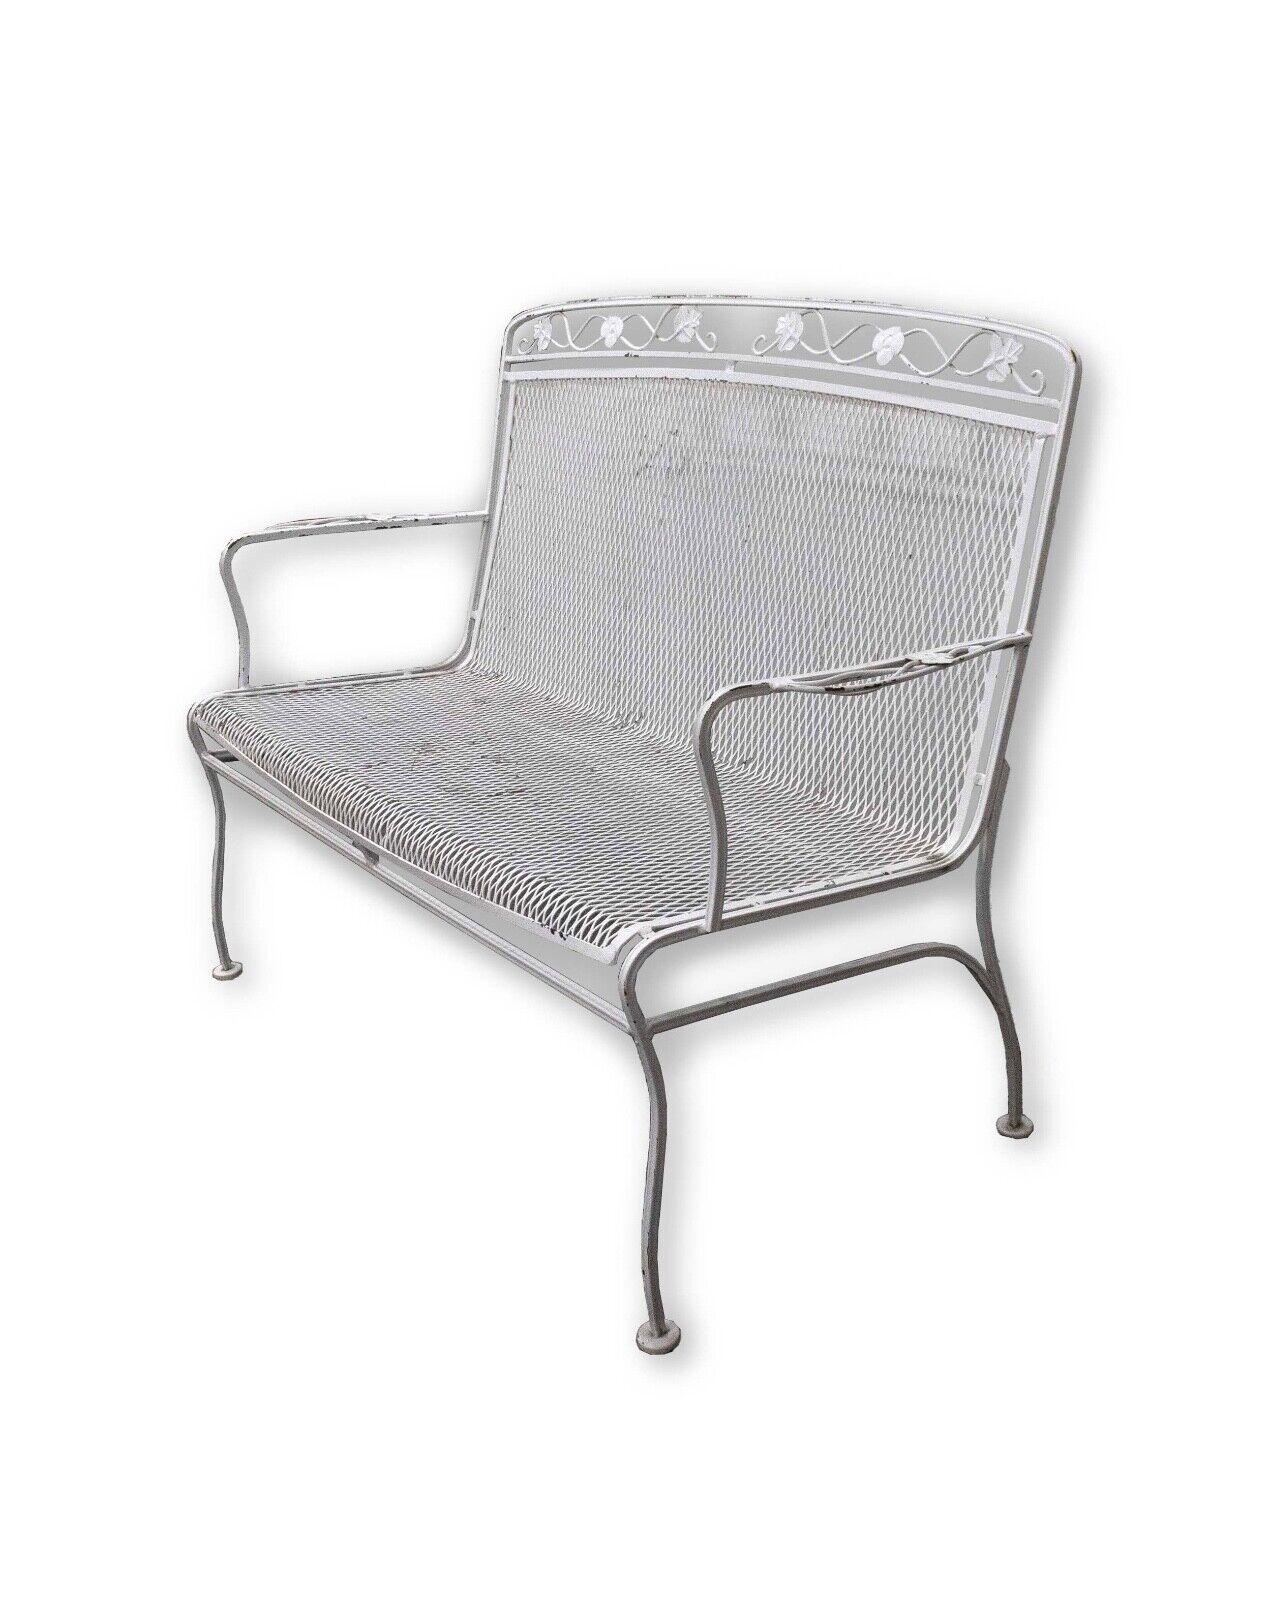 The Vintage Woodard White Wrought Iron Garden Bench Settee is a stunning representation of mid-century modern design for your outdoor space. Crafted by Woodard, a renowned name in wrought iron furniture, this garden bench settee boasts a timeless